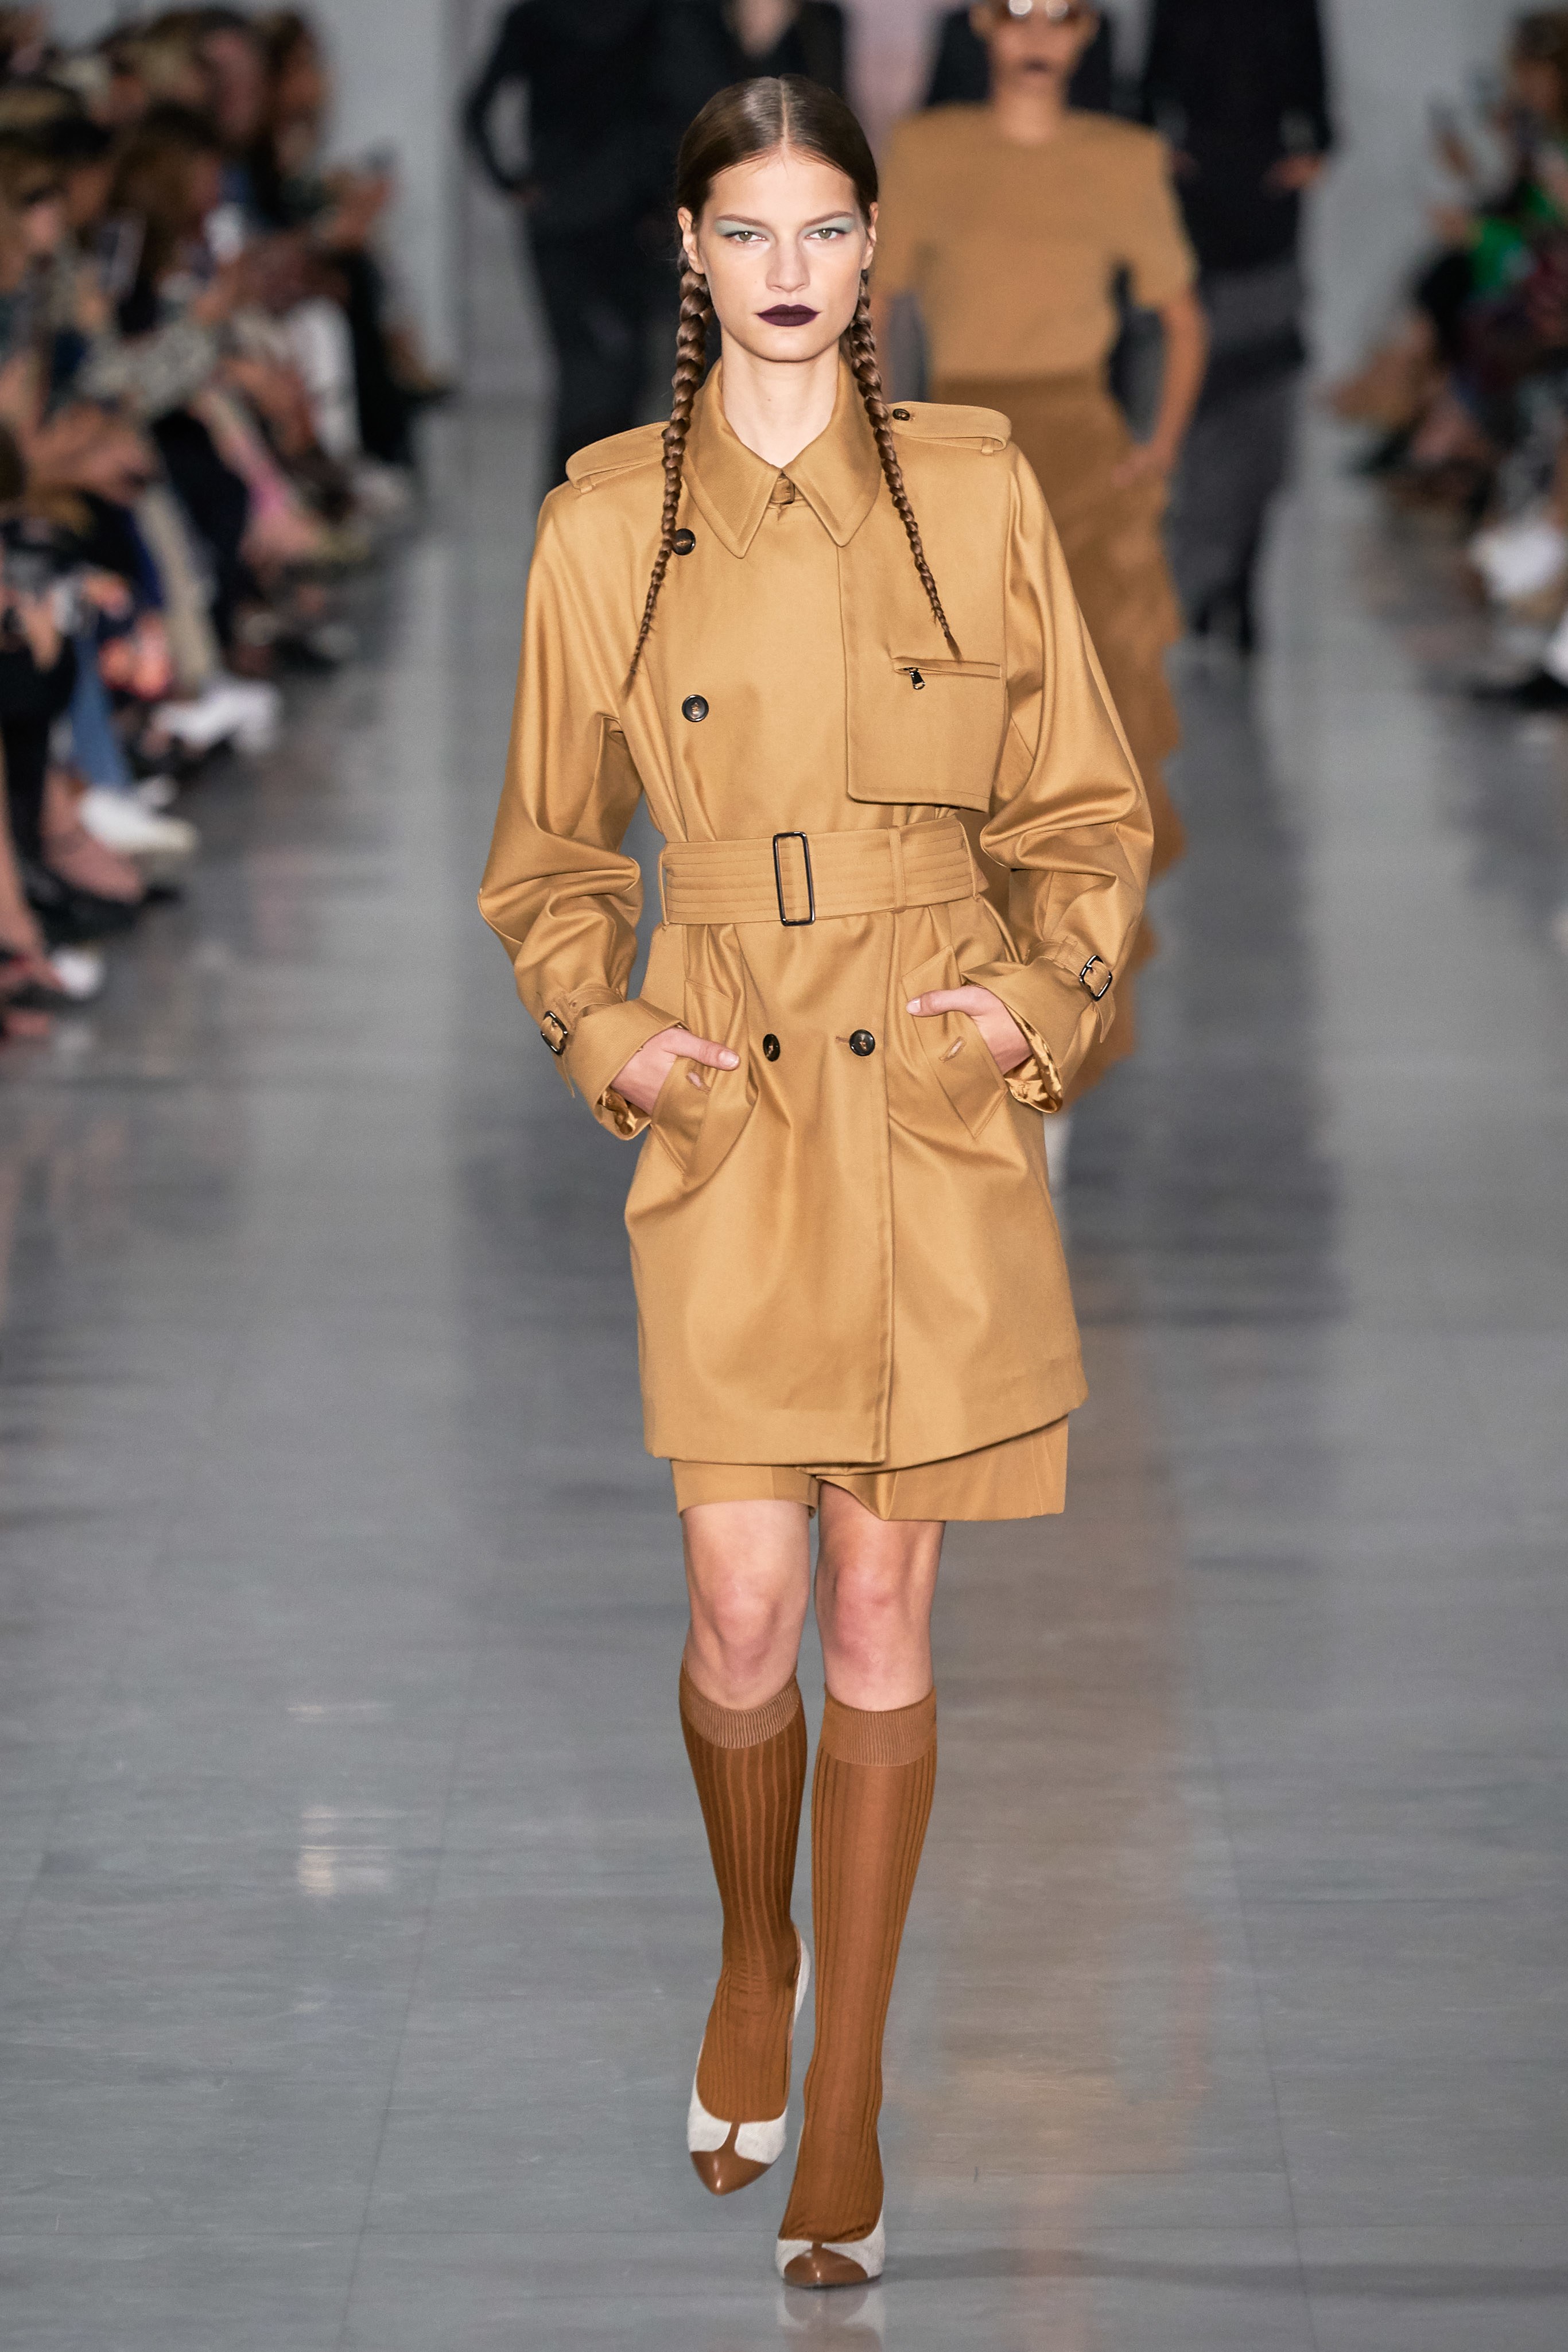 Max Mara Spring Summer 2020 SS2020 trends runway coverage Ready To Wear VogueGivenchy Spring Summer 2020 SS2020 trends runway coverage Ready To Wear Vogue monochrome